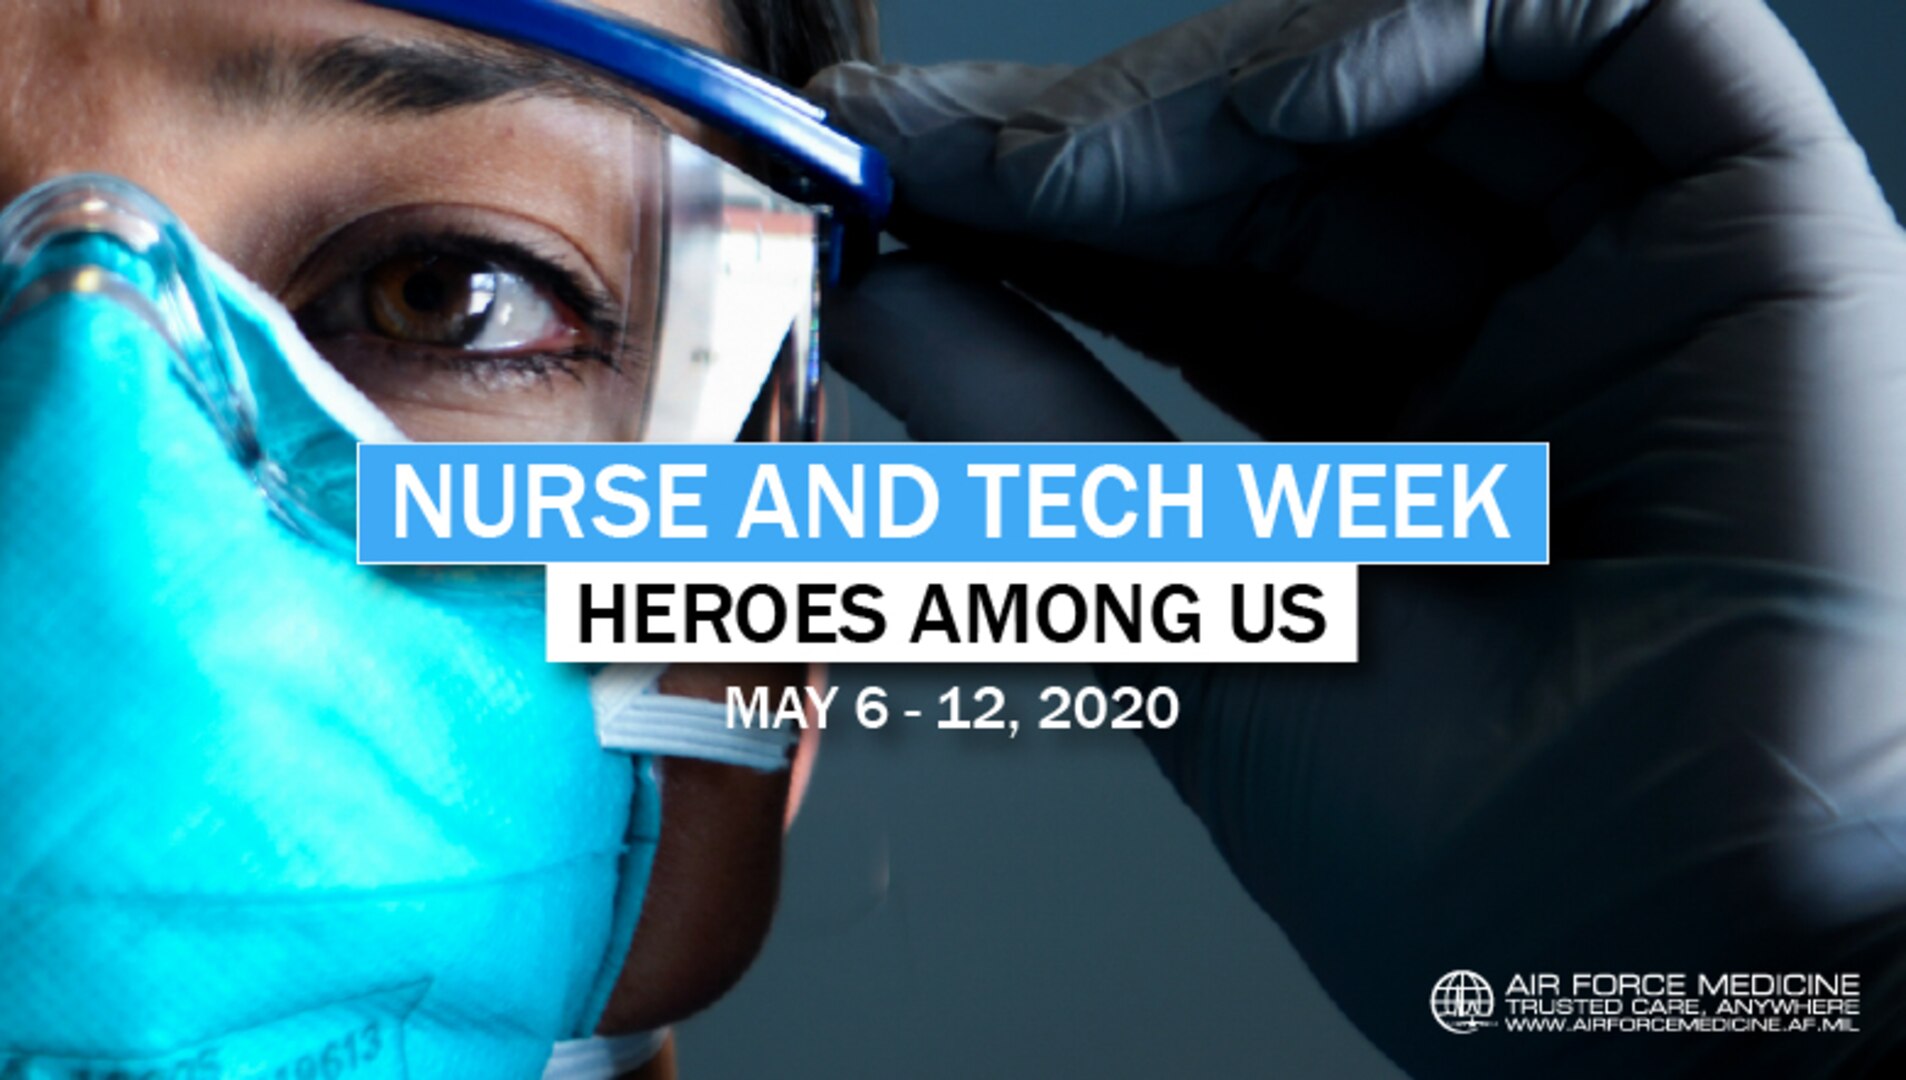 Air Force nurses and medical technicians are answering our nation’s call, and now more than ever, during this pandemic, we know they are heroes one and all.